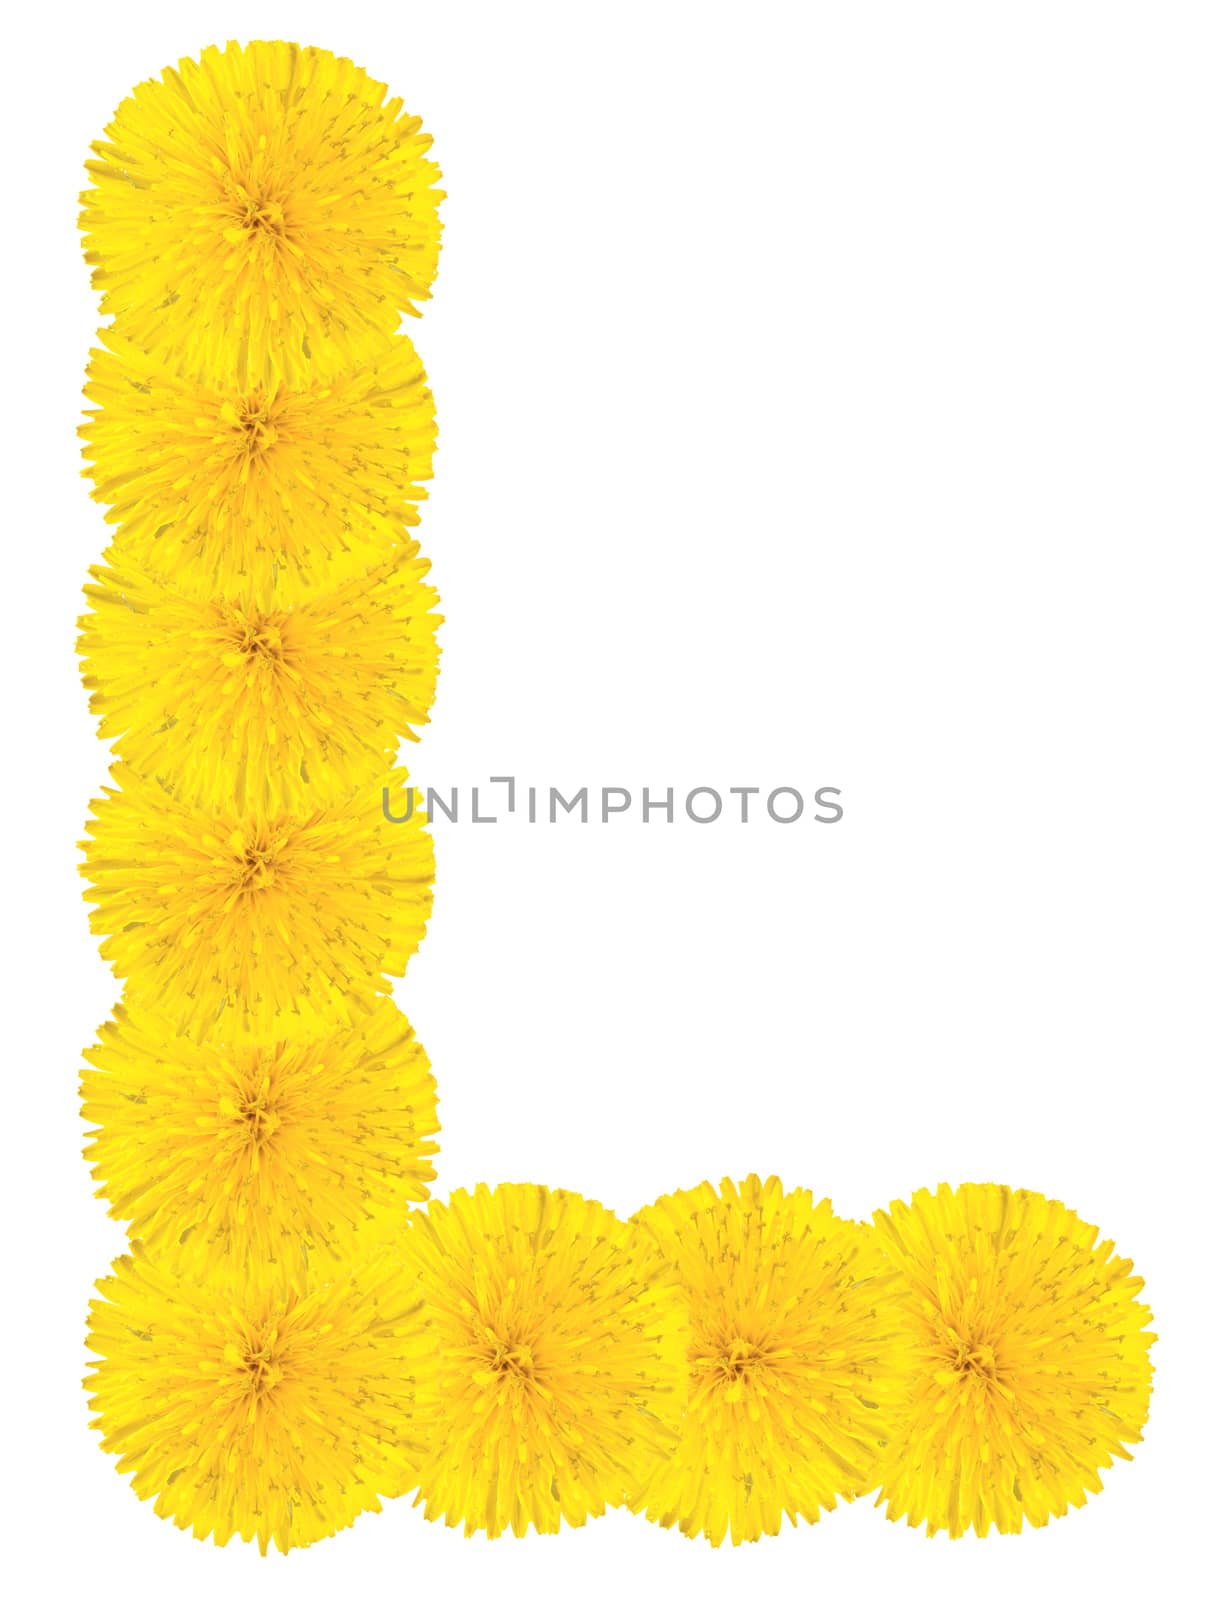 Letter L made from dandelion flowers isolated on white background